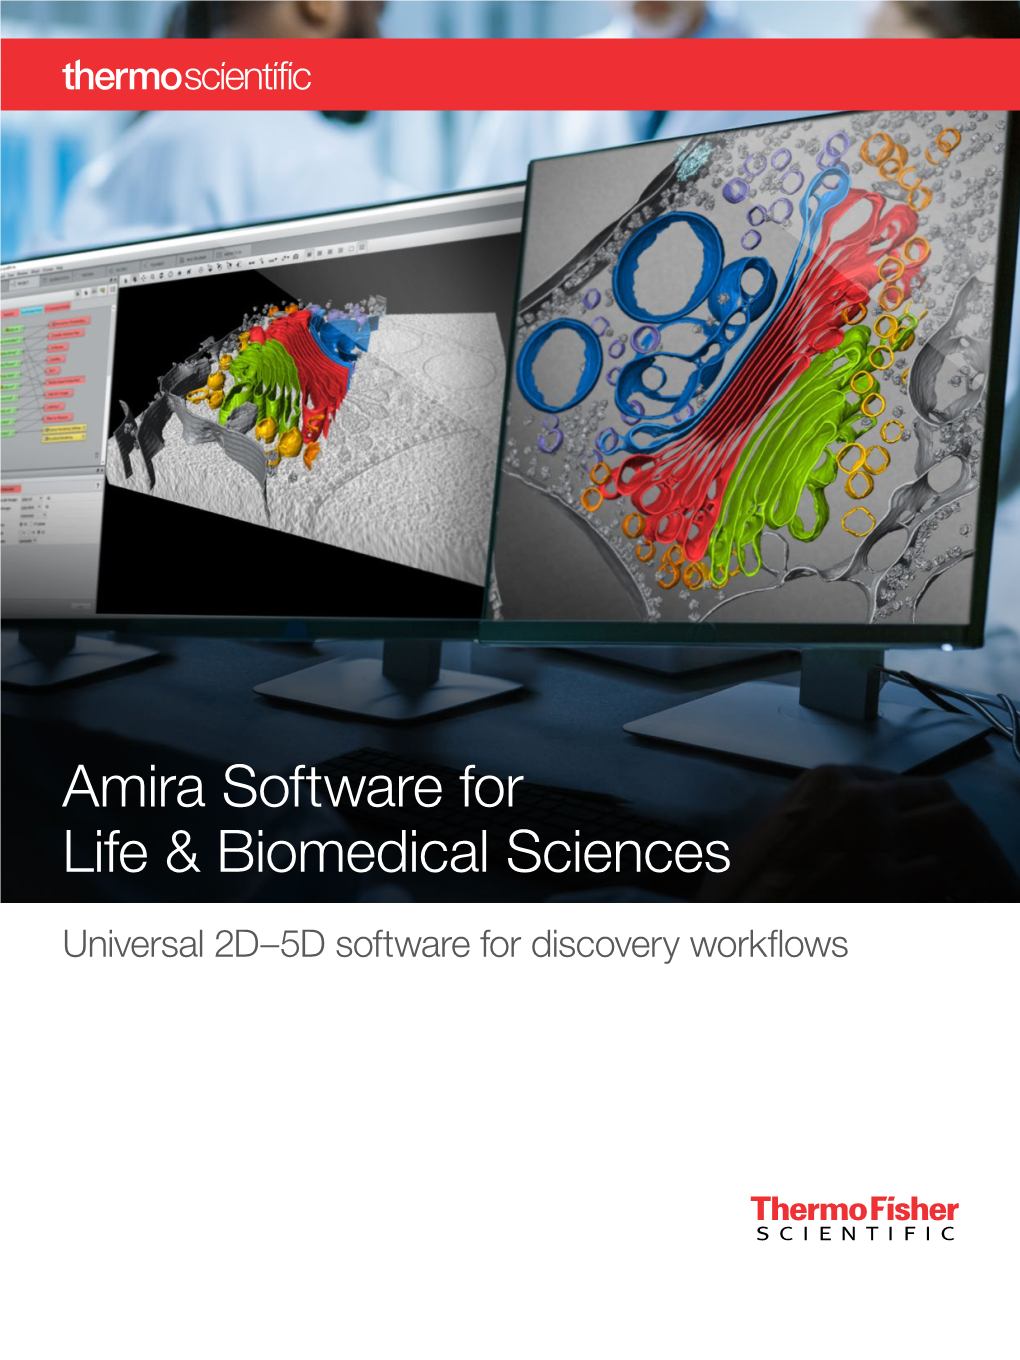 Amira Software for Life & Biomedical Sciences